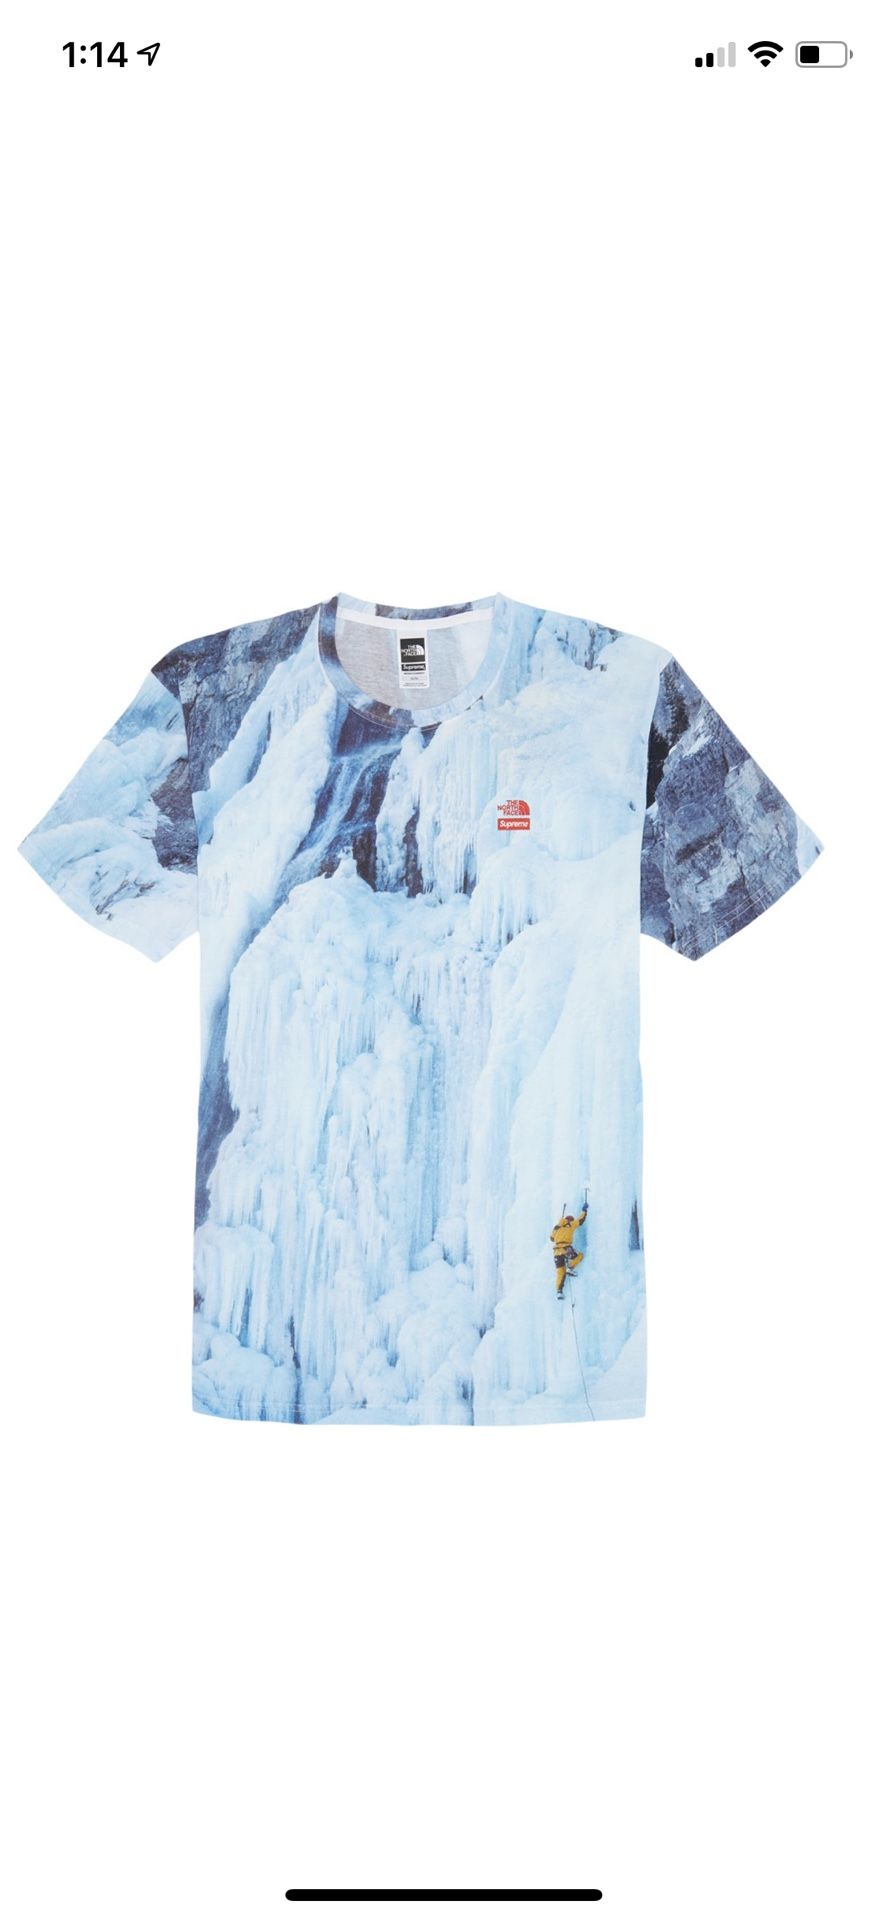 Supreme x The North Face Ice Climb Tee Size LARGE Great Quality Ships Today